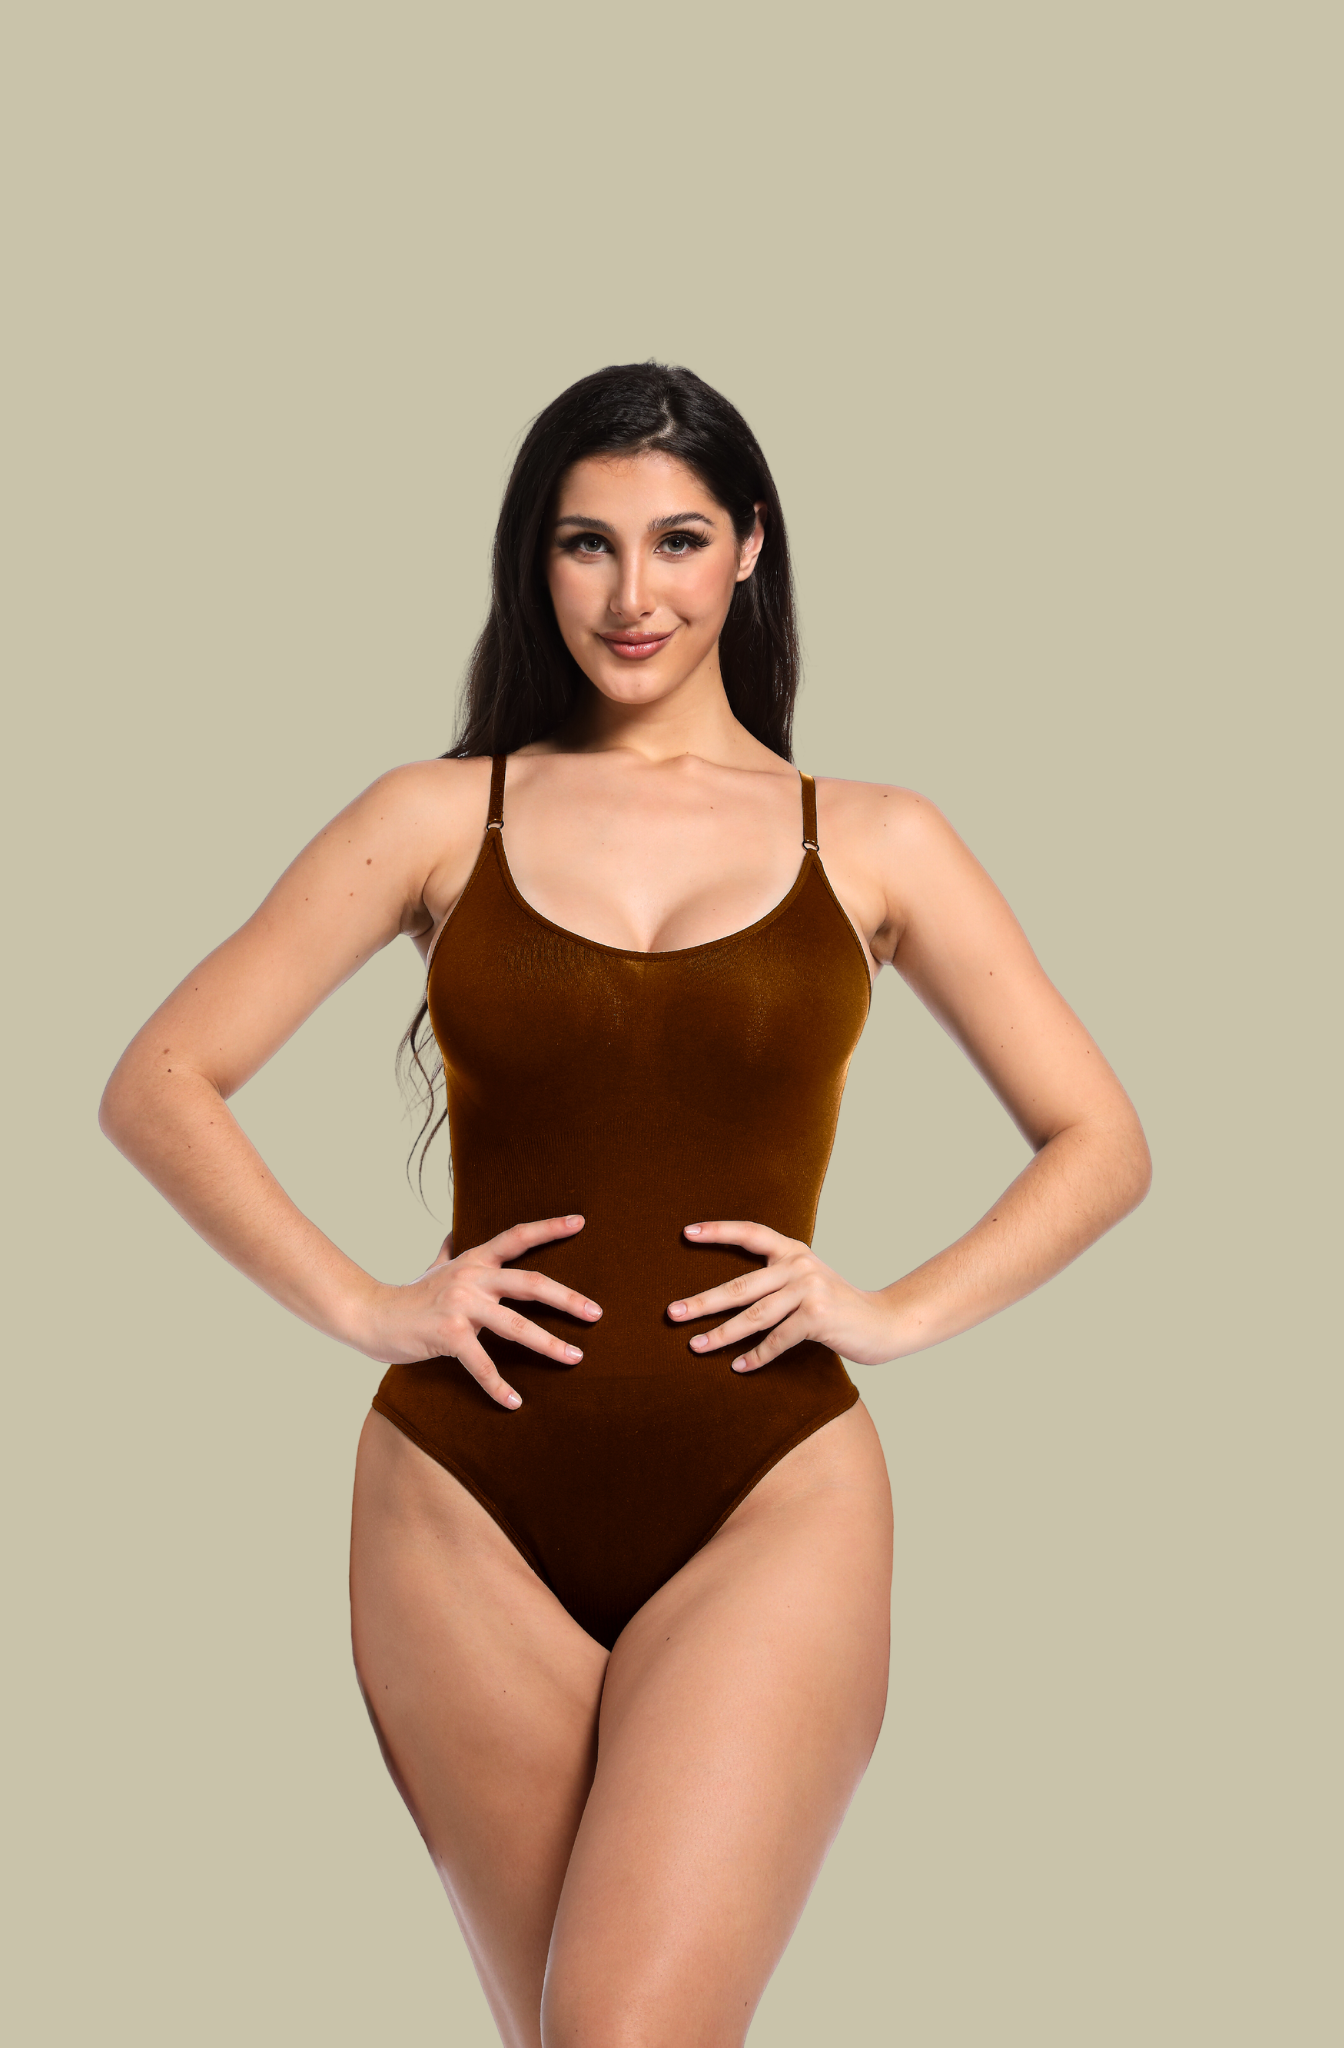 Snatch your confidence and curves with our Snatched Shapewear Bodysuit